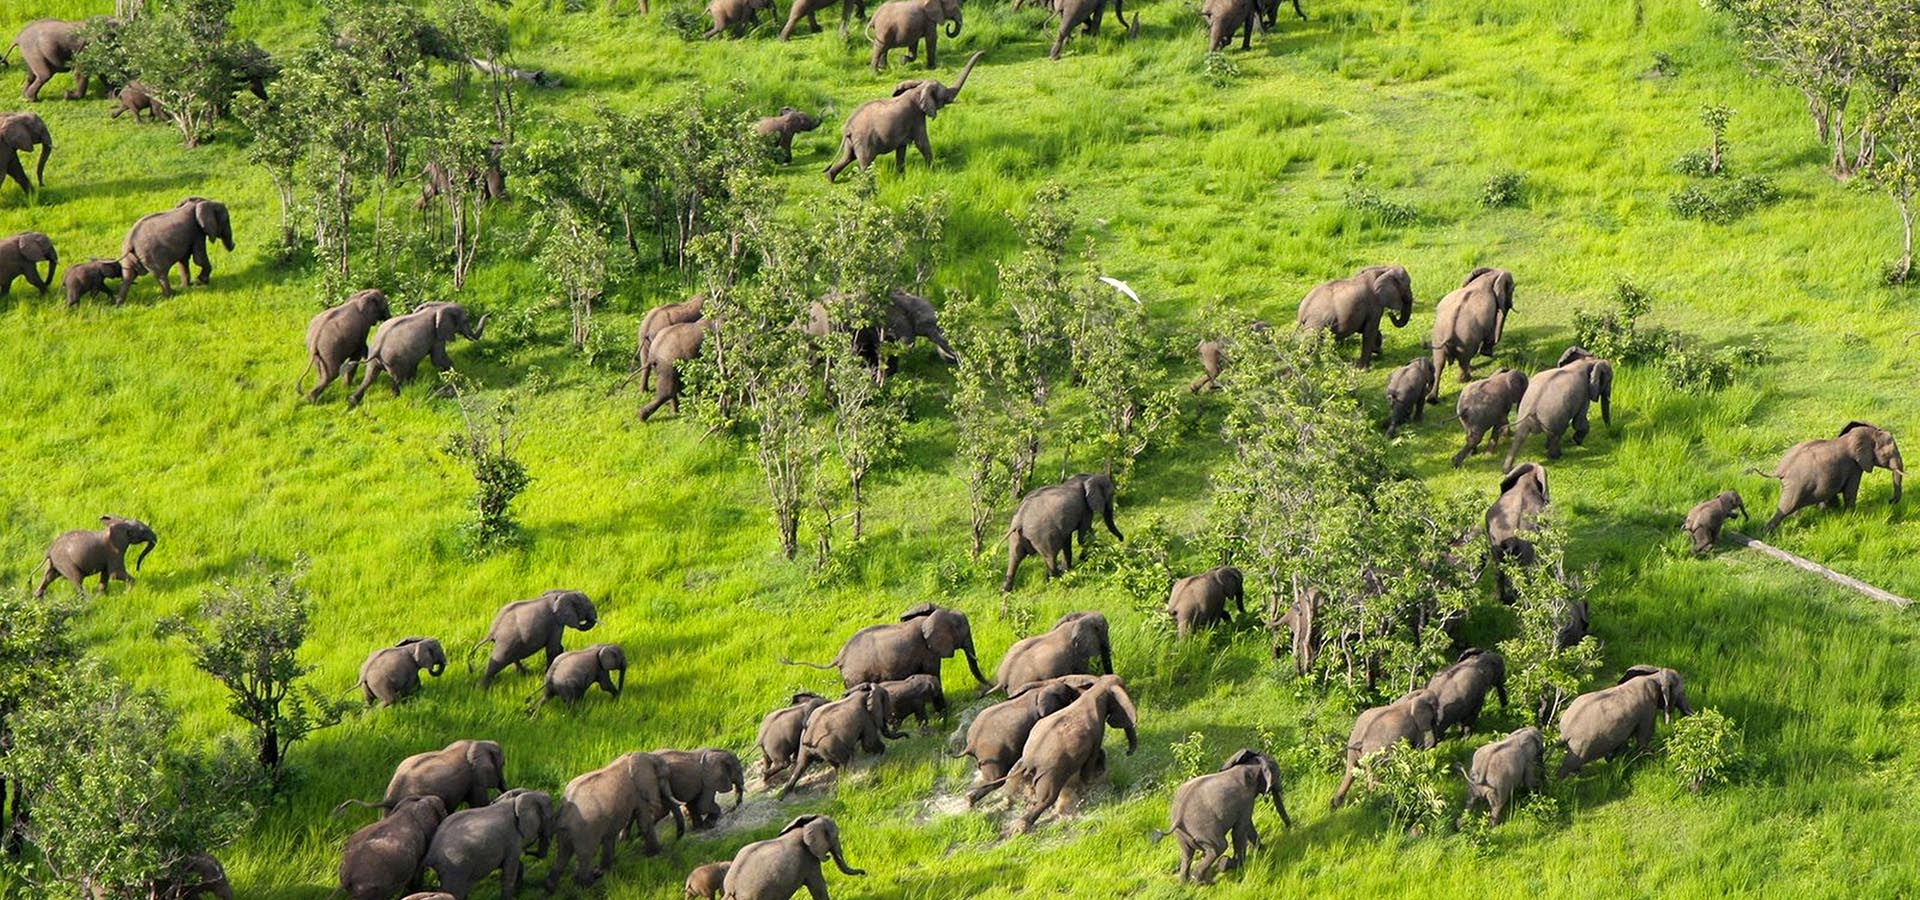 Counting Elephants Continues: New Aerial Survey Completed